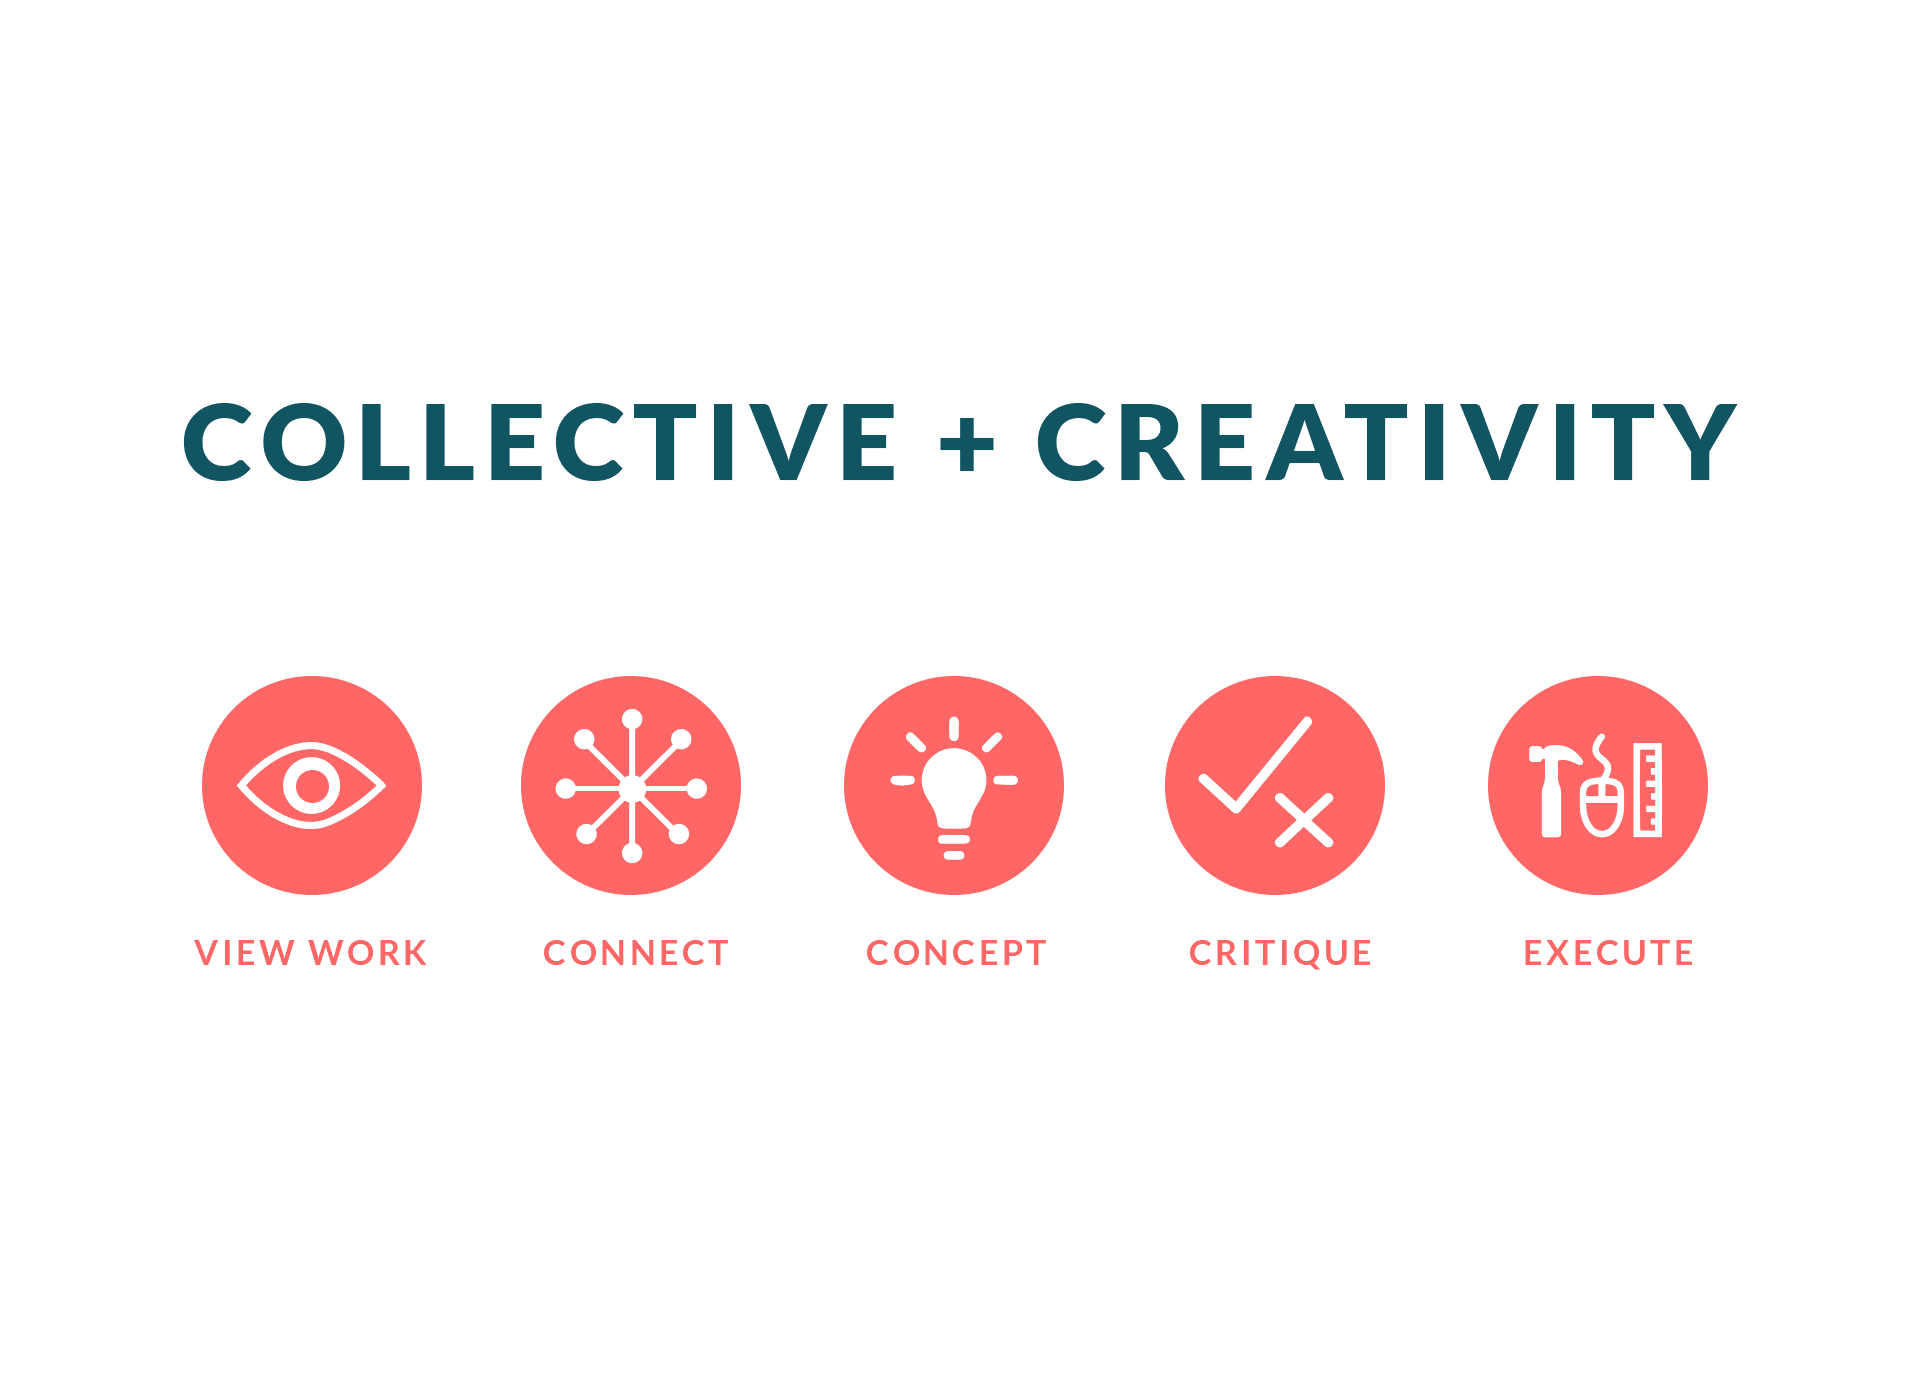 Collectivity, Research & Inspiration, Journey Mapping, Sketching & Wireframing, final solution for Collectivity, Collectivity offers, Thoughts & Learnings